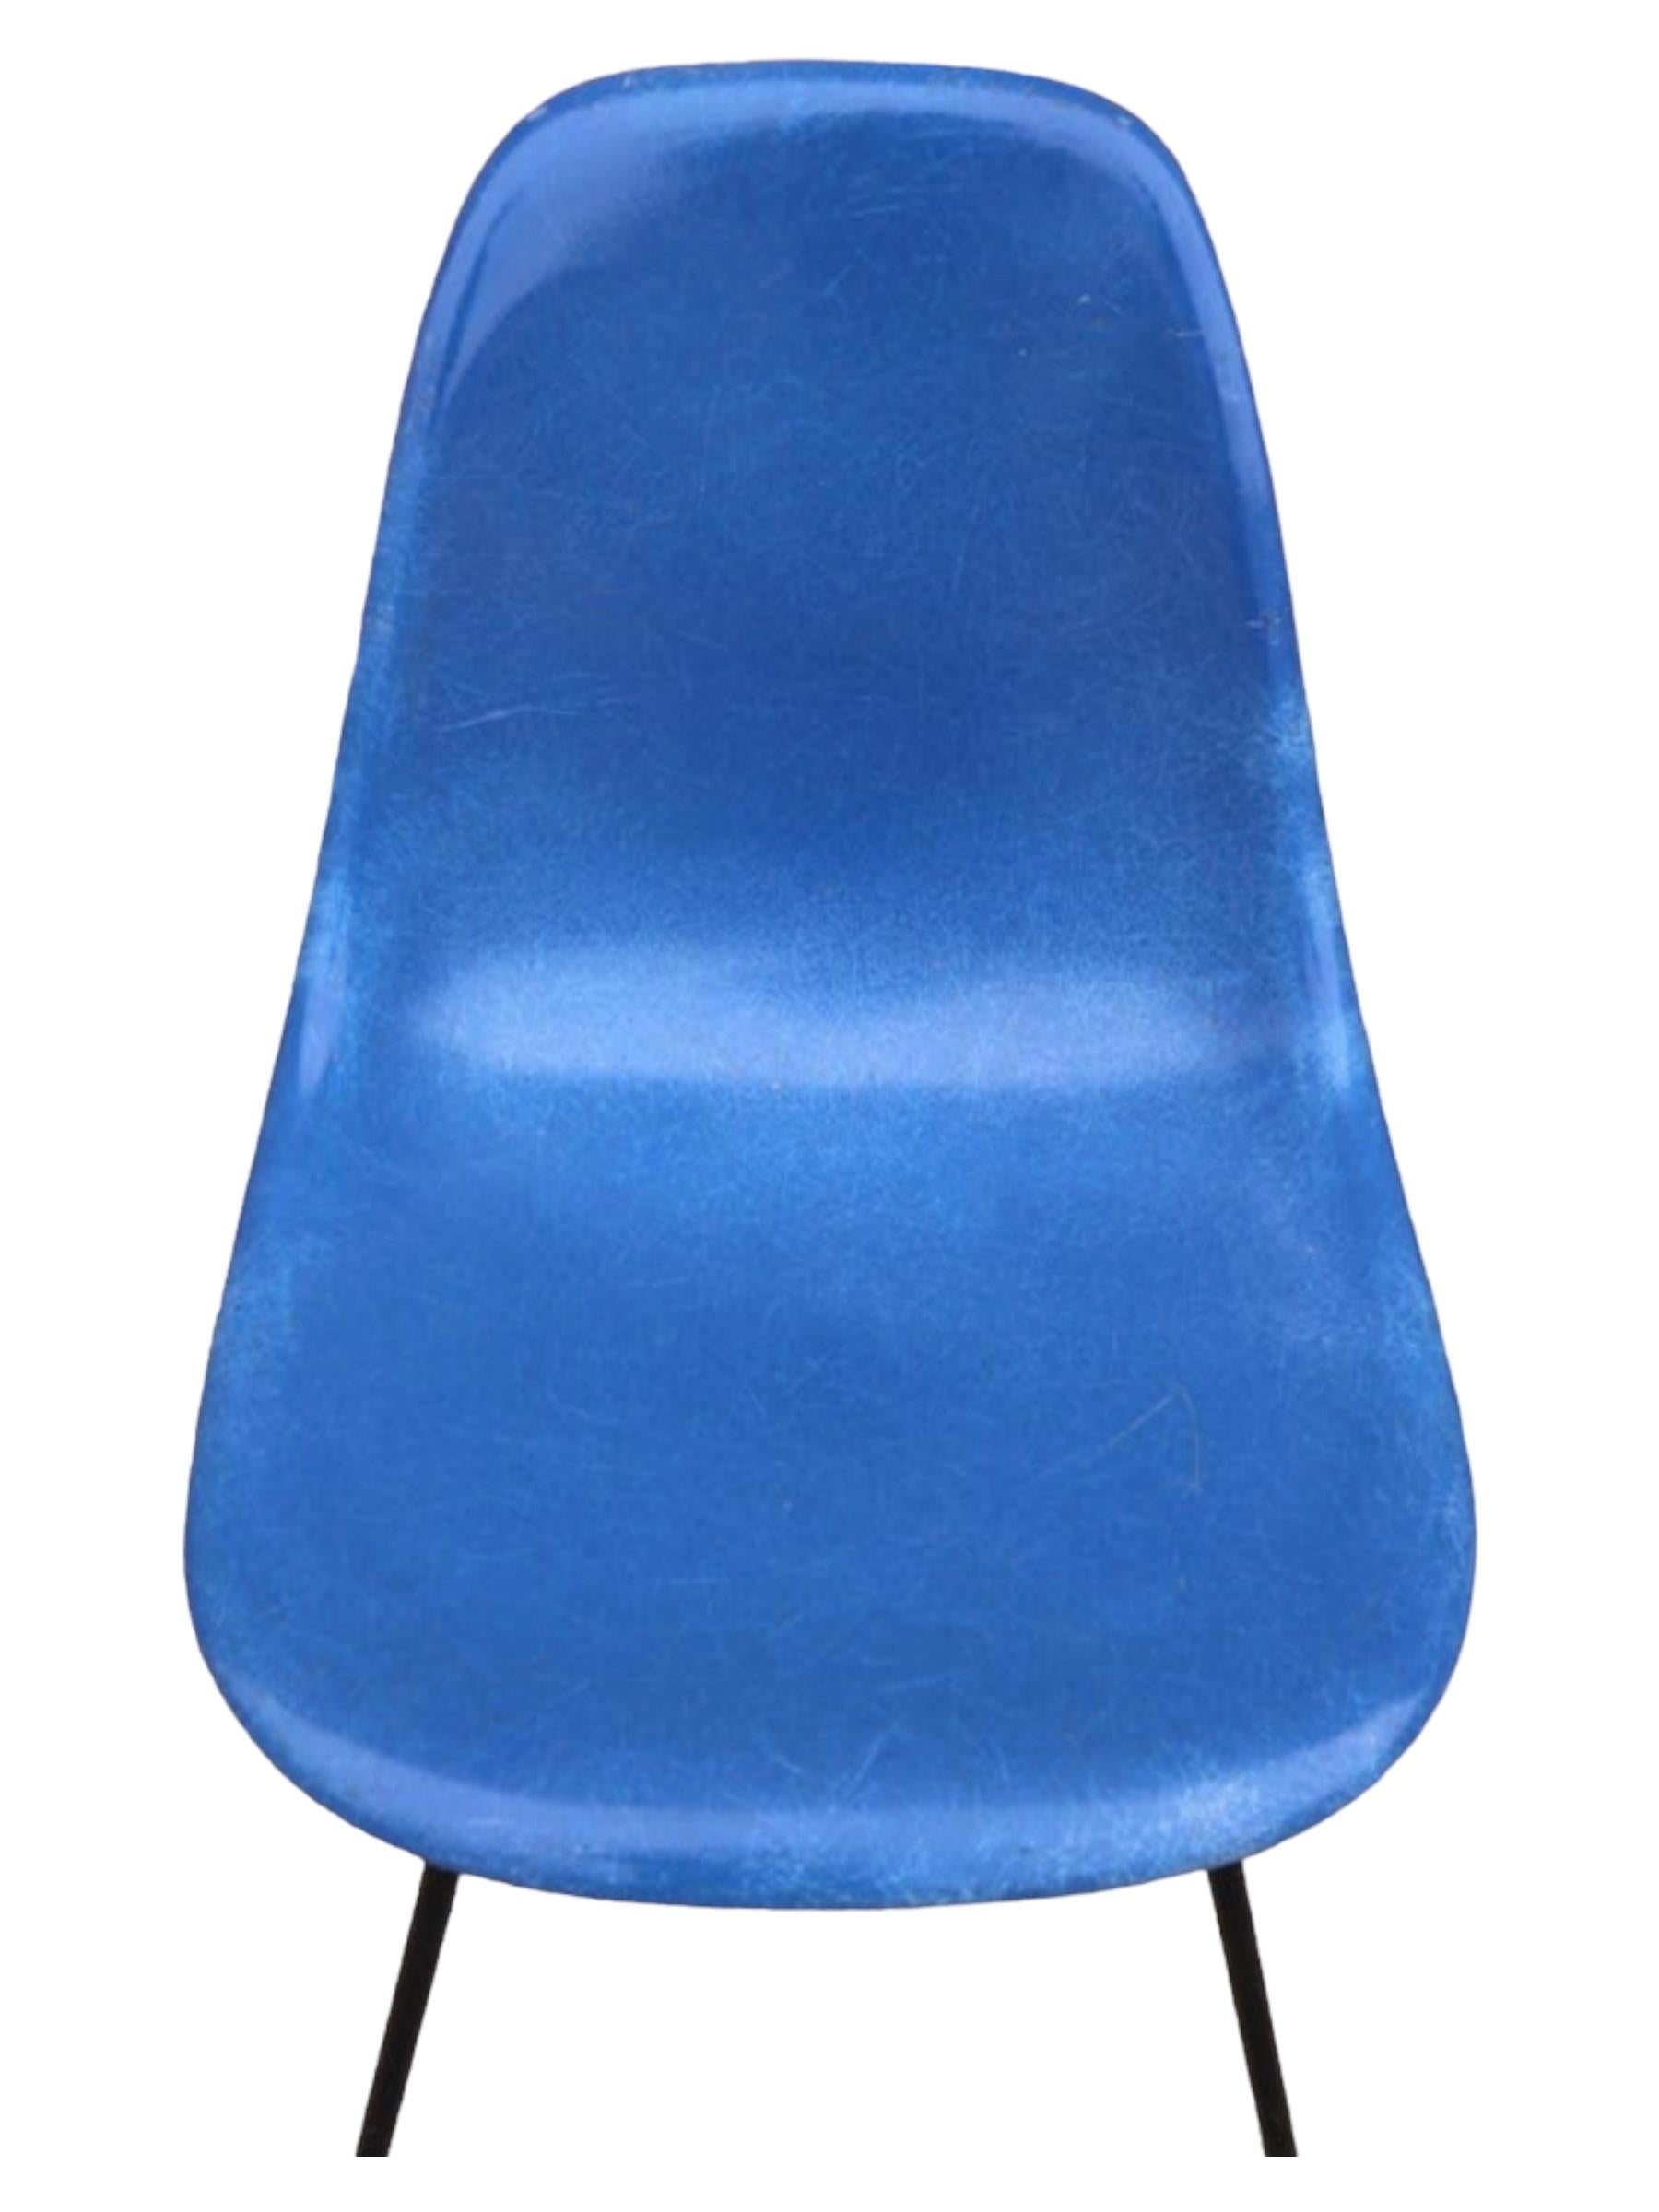 Set of 8 Royal Blue Herman Miller Eames Dining Chairs In Good Condition For Sale In Brooklyn, NY